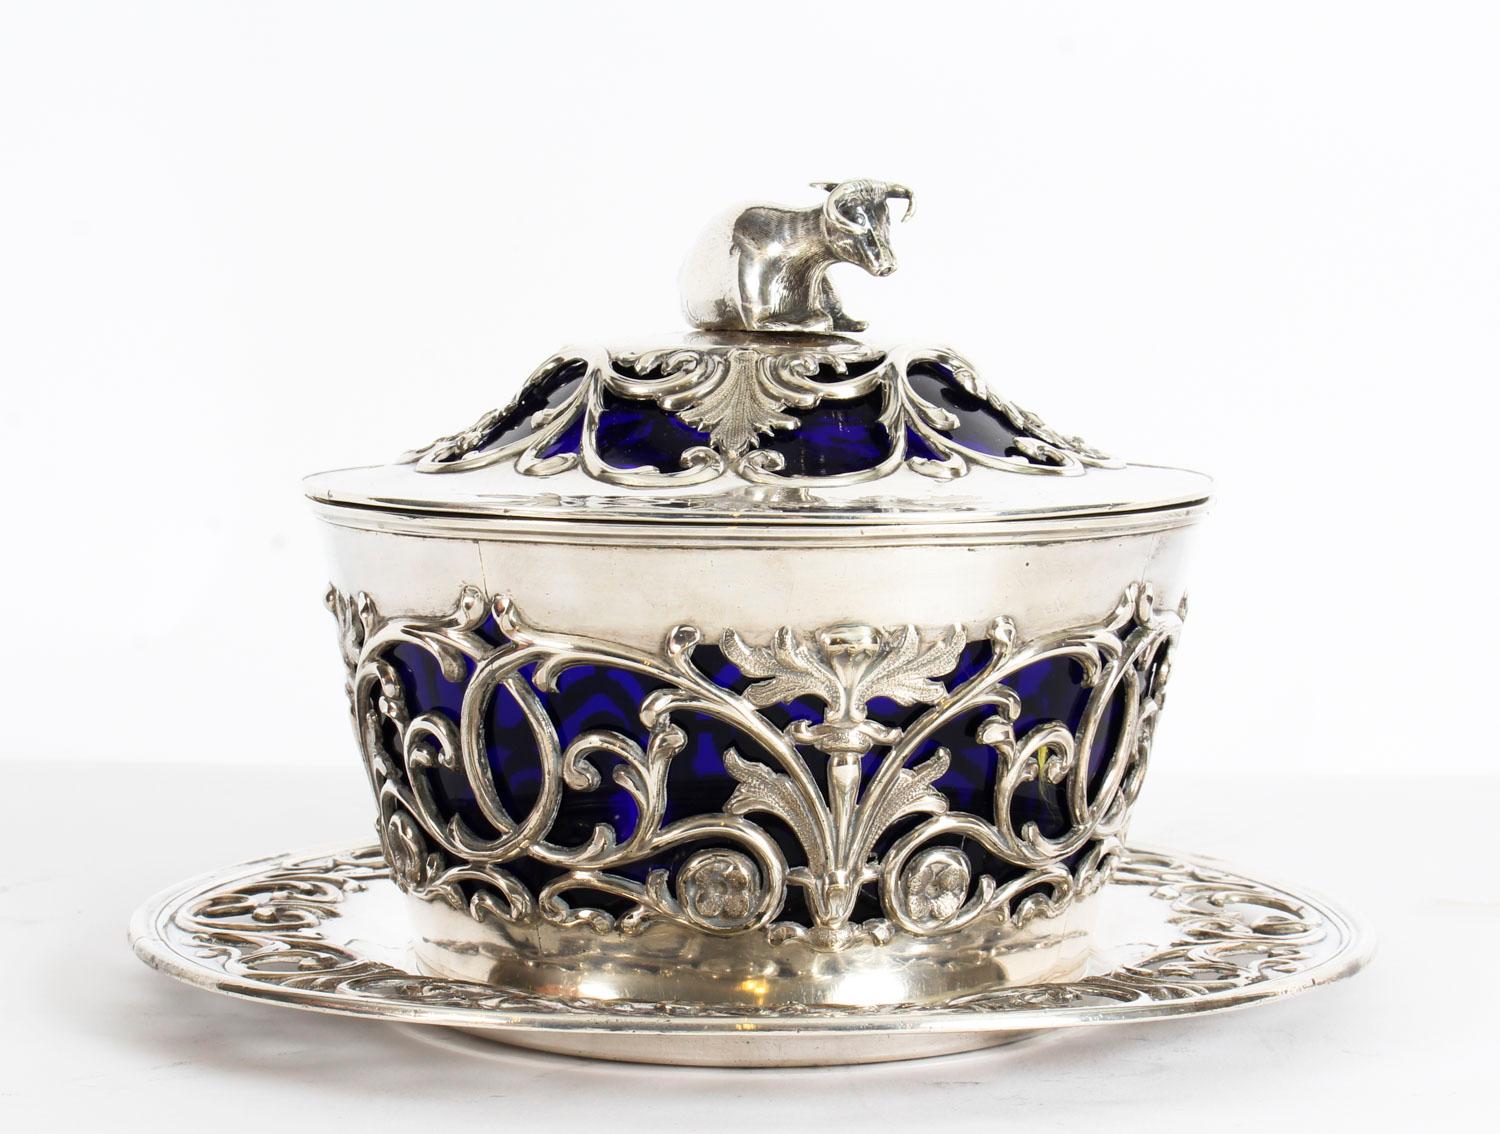 Early 19th Century Old Sheffield Silver Plated and Bristol Blue Glass Butter Dish, 19th Century